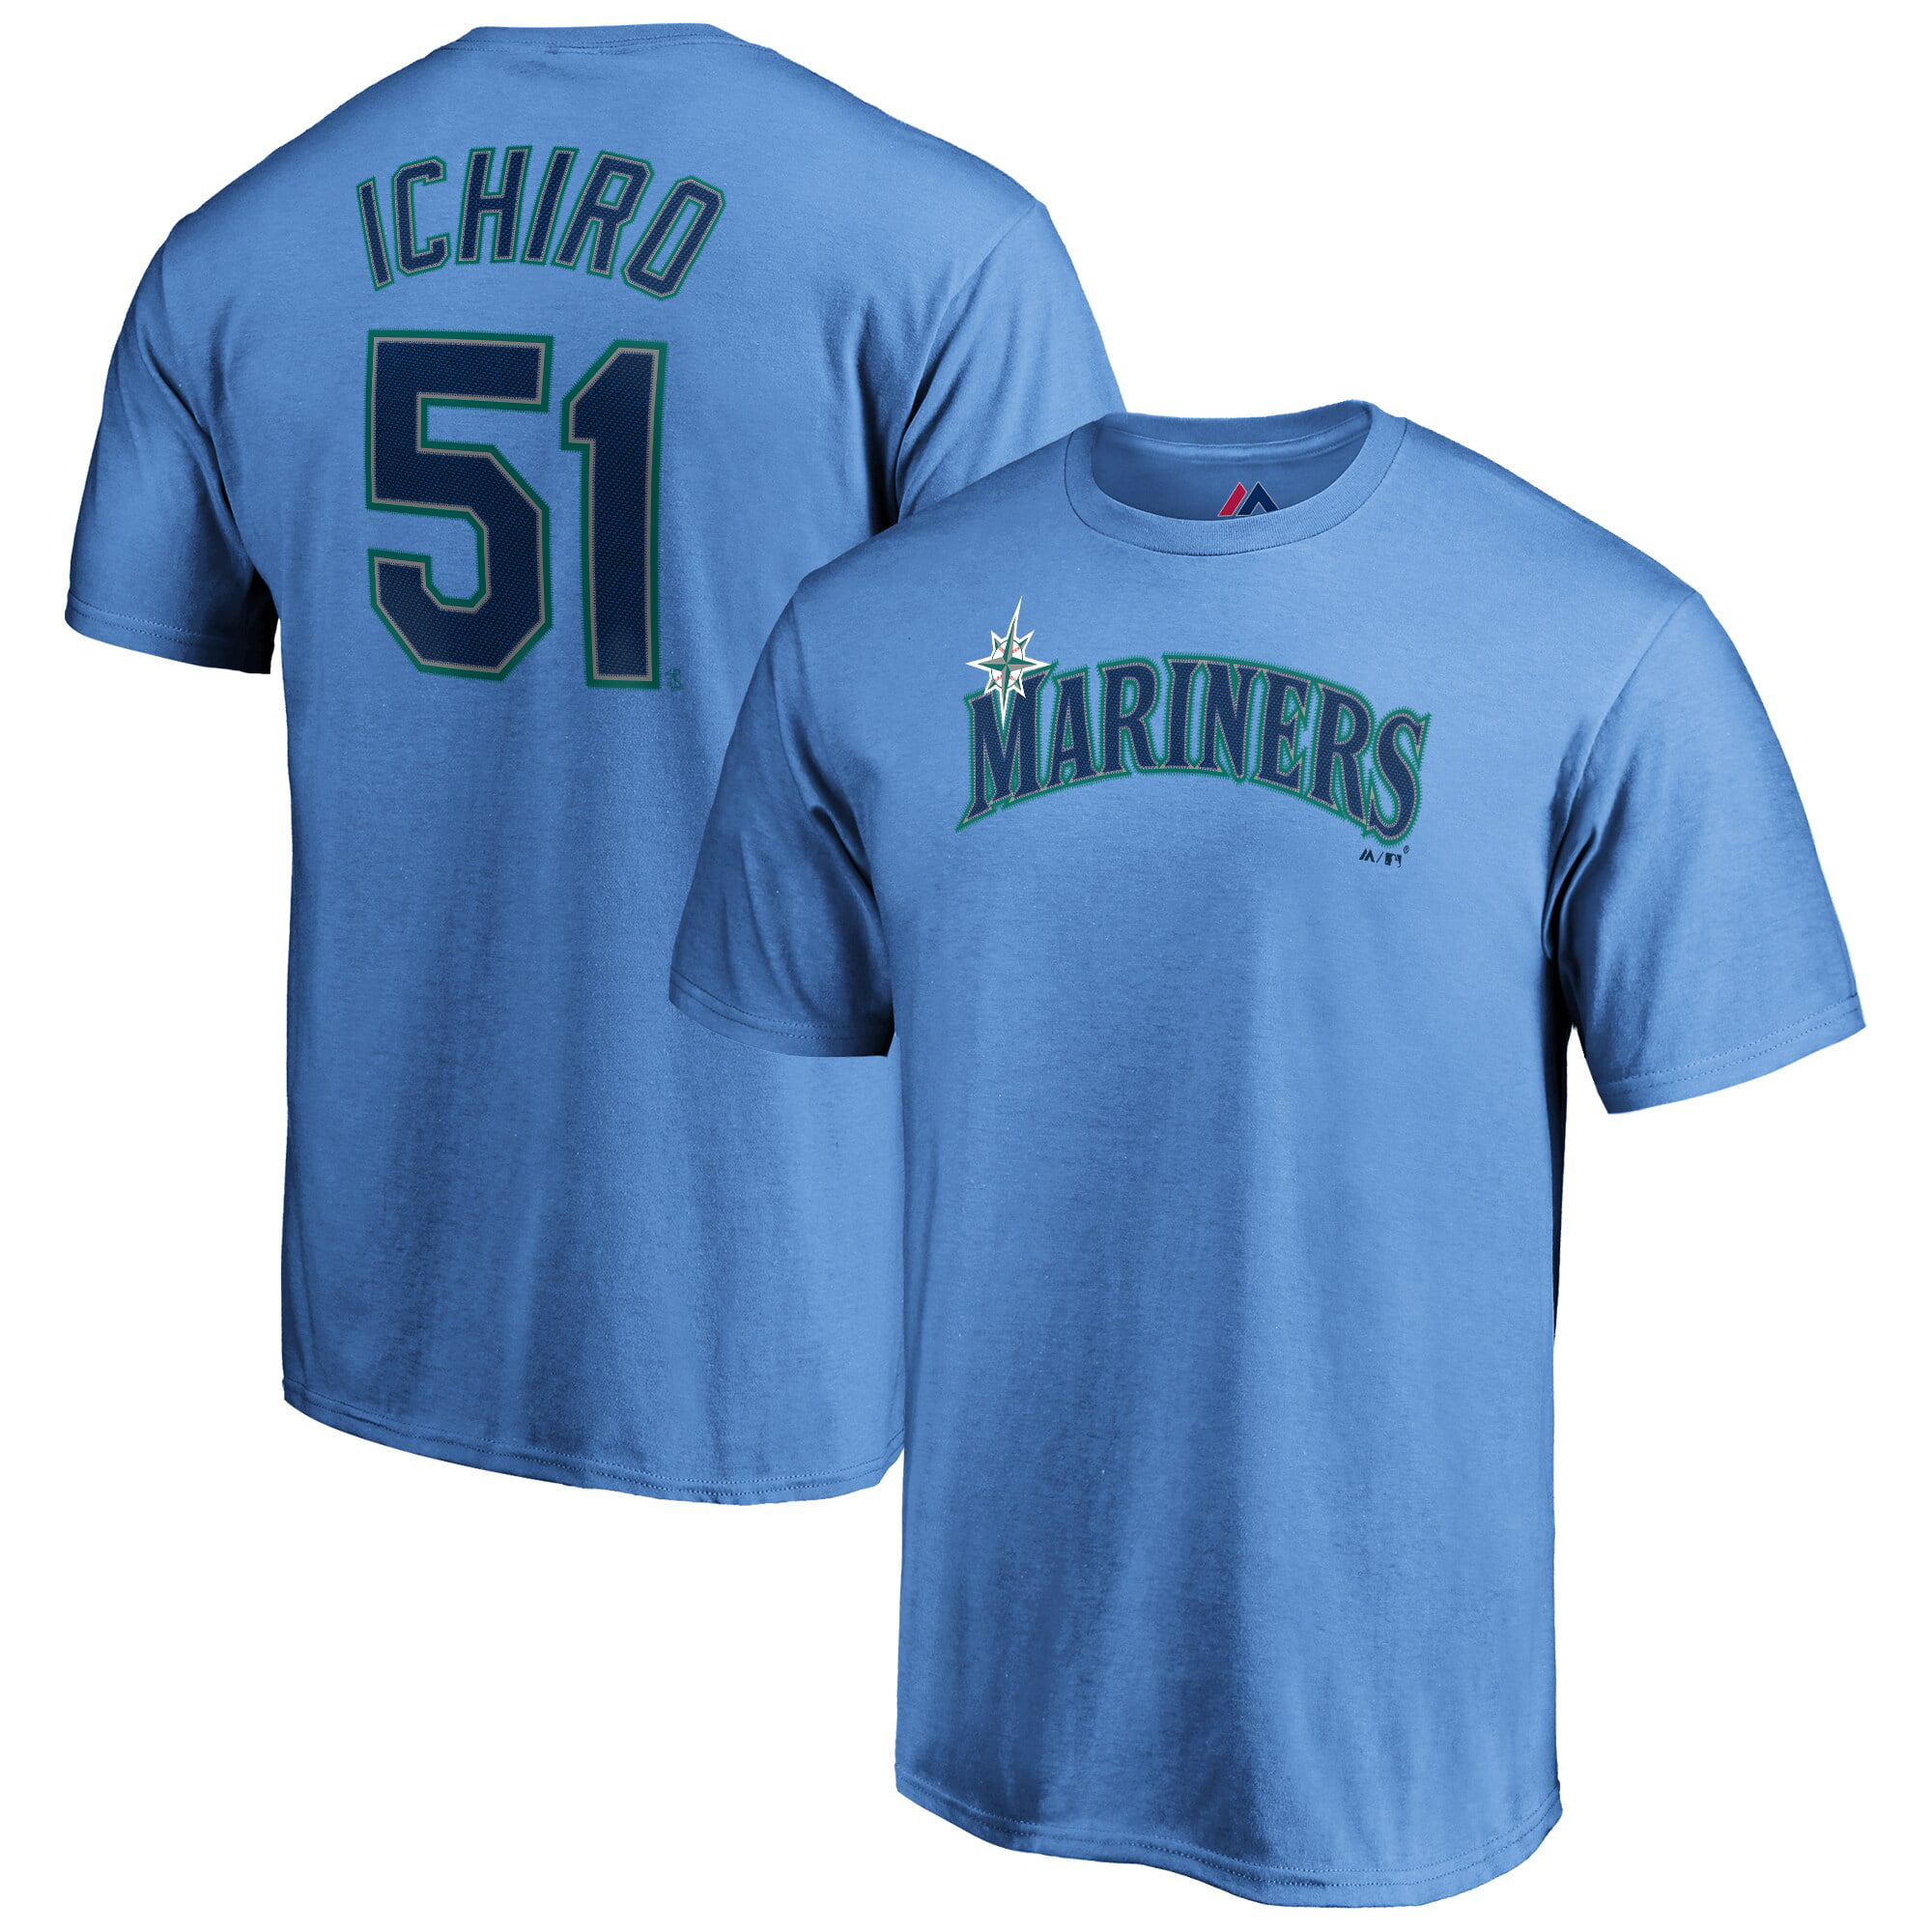 mariners baby blue jersey